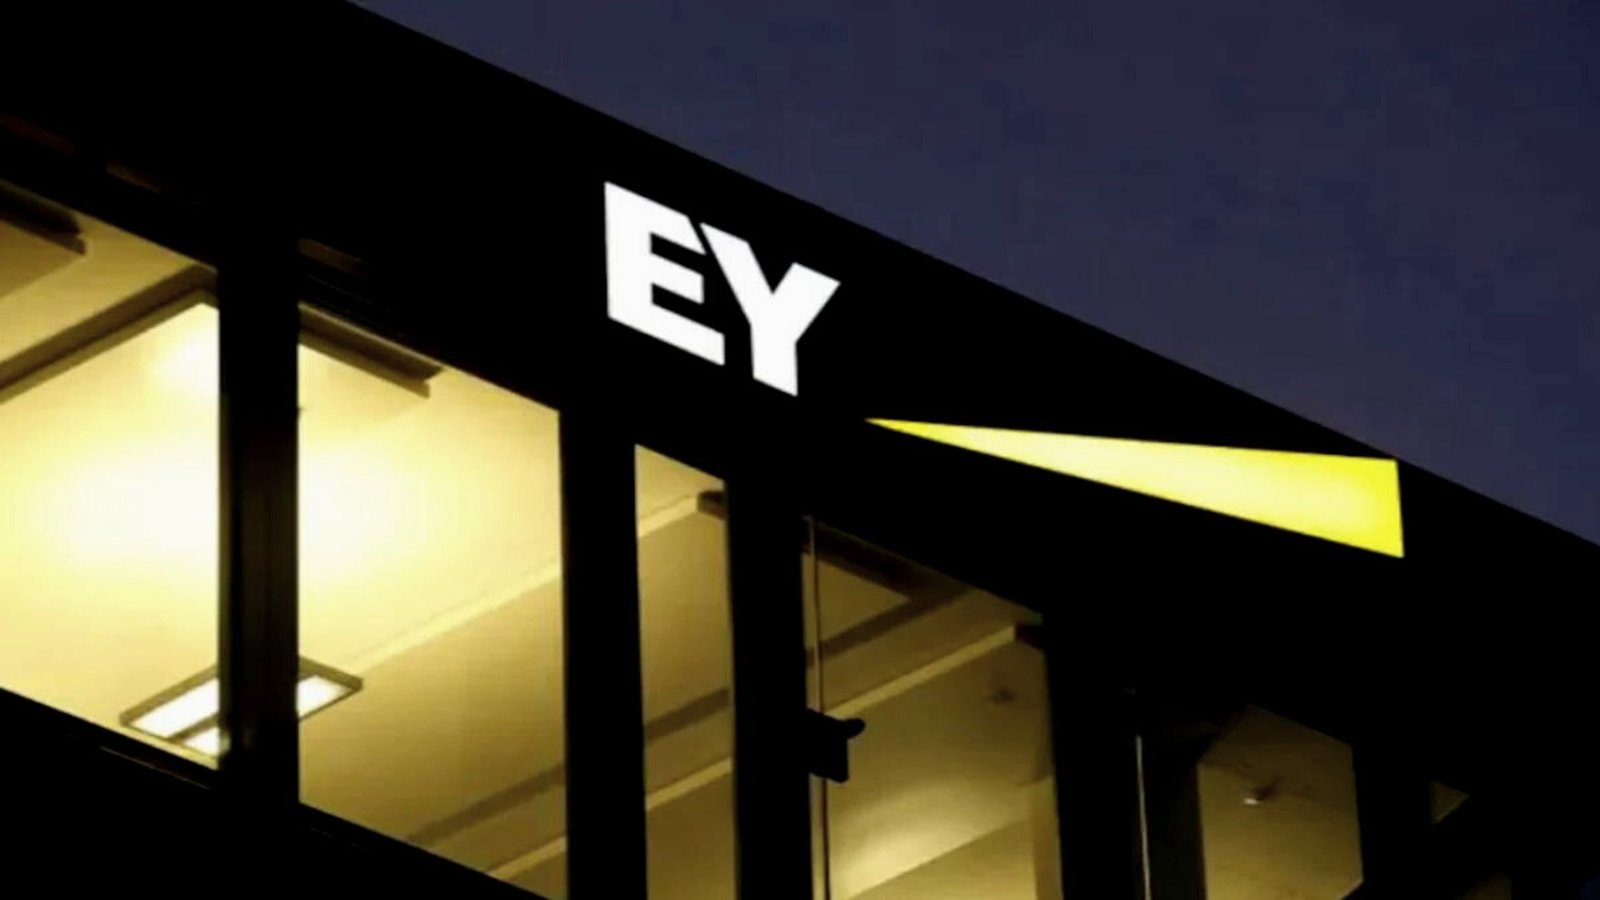 Ernst And Young Fined $100 Million After Employees Cheated In Exams